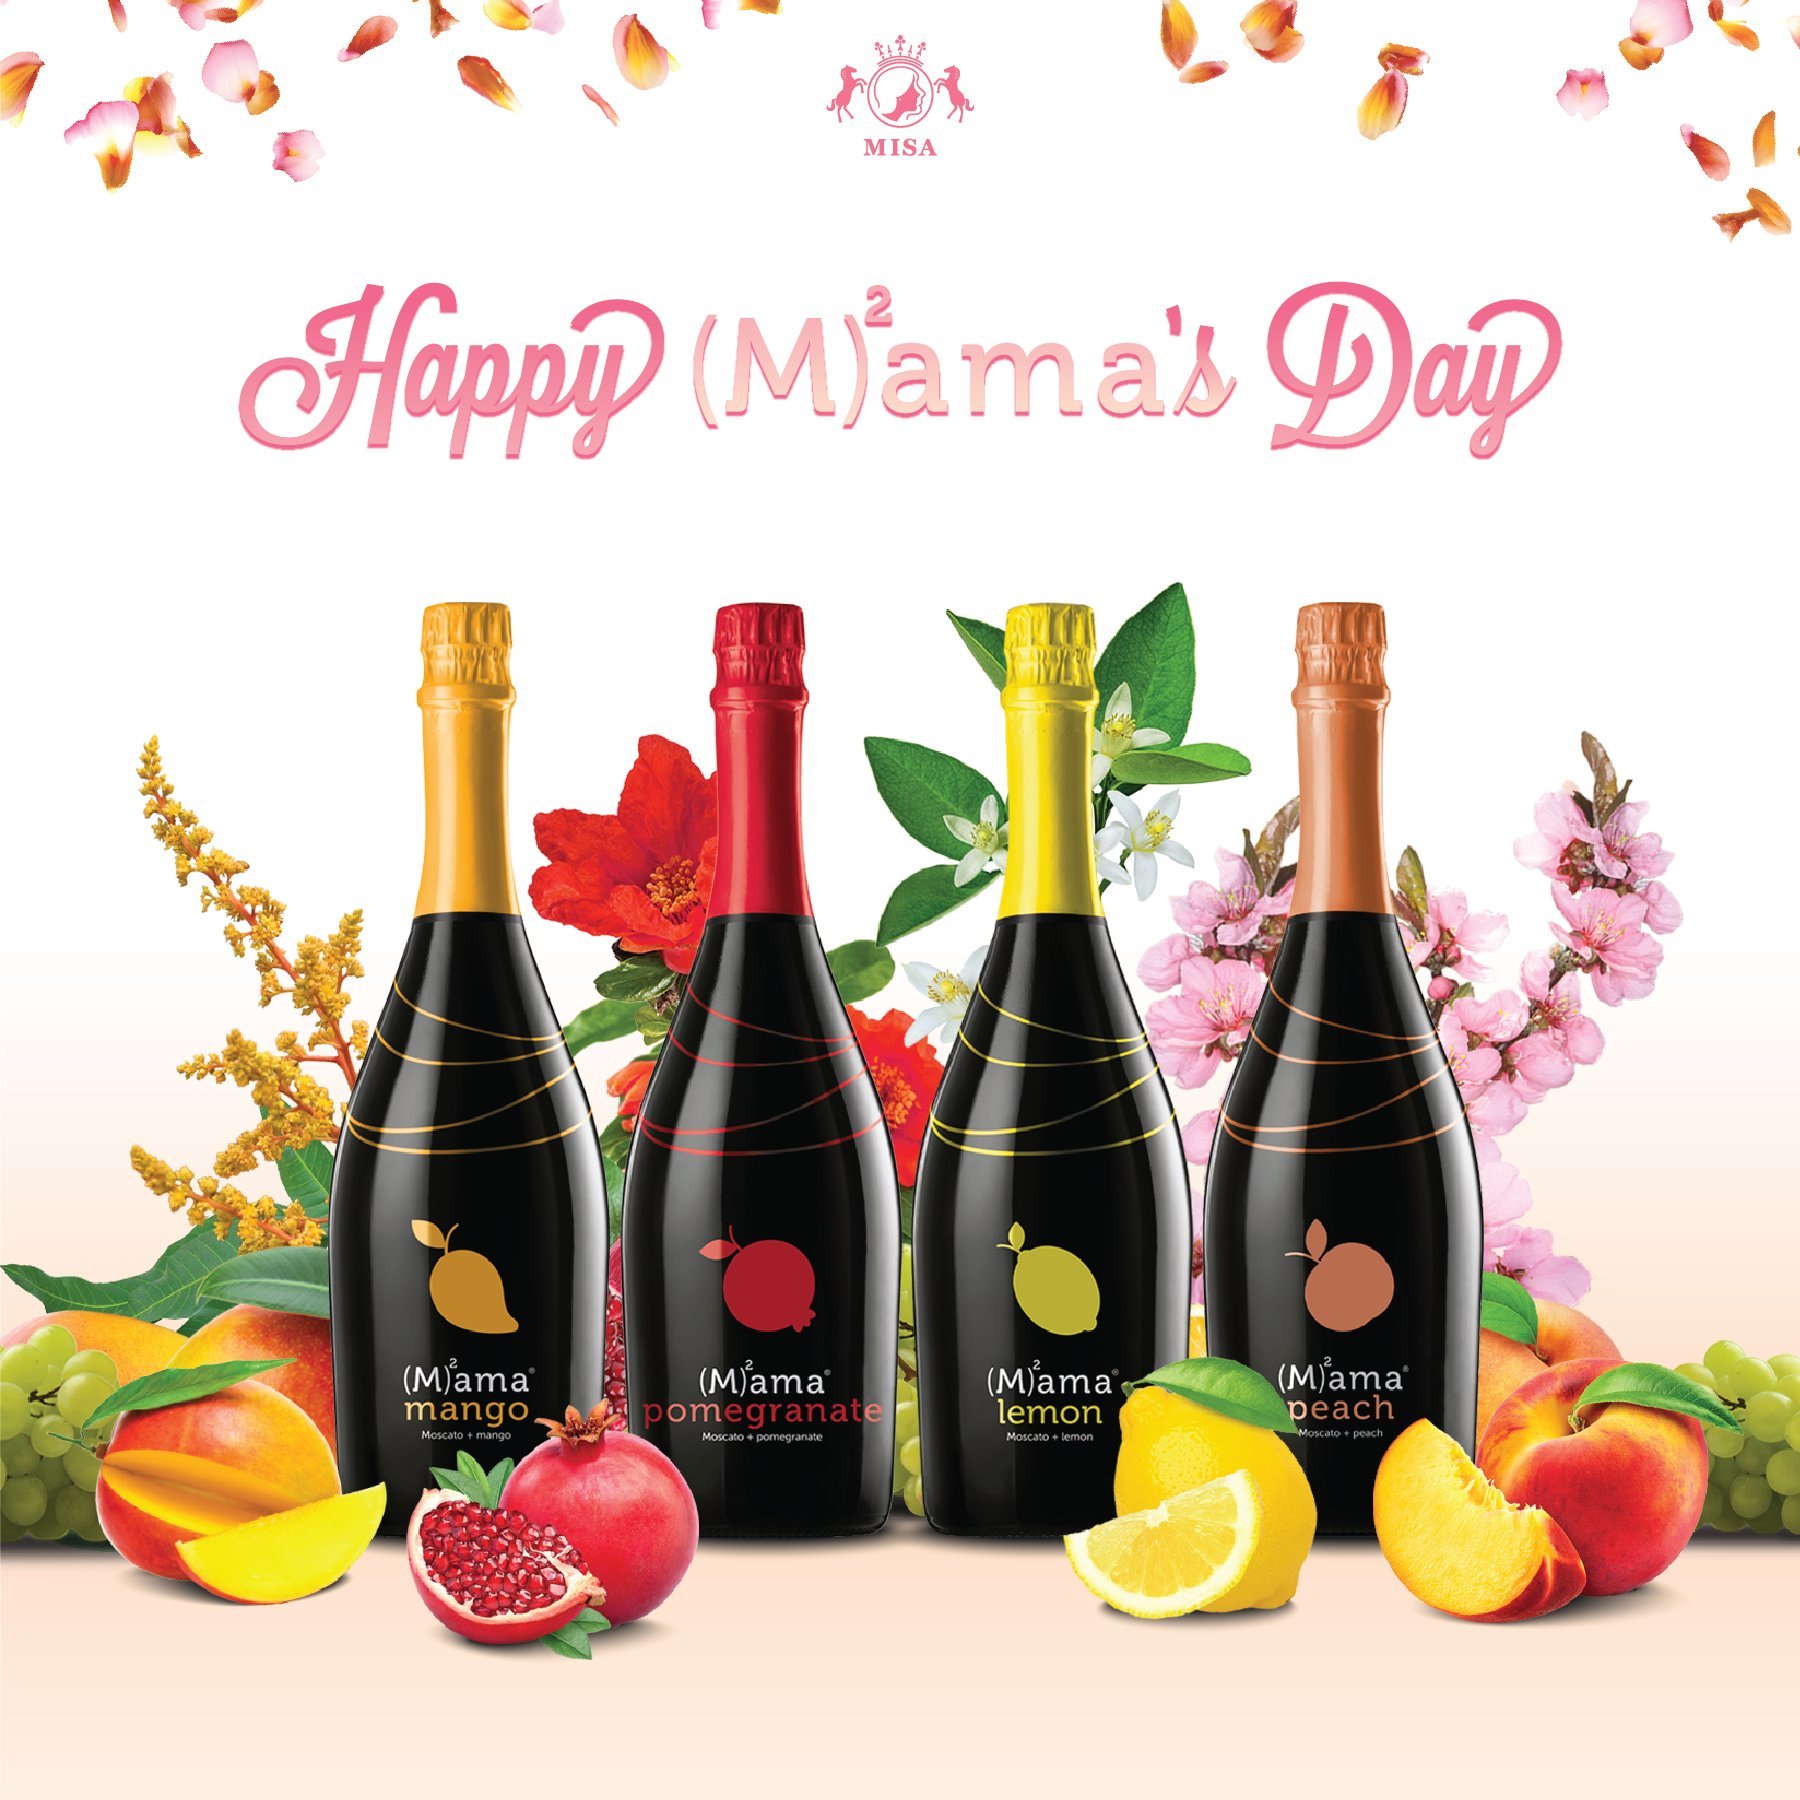 Happy Mama's Day! 
Whether you call your mother Mom, Mommy, Madre, or Mama, we here at MISA hope you toast her with her favorite flavor from our (M)&sup2;ama line of fruit-infused moscato! 
Peach, Pomegranate, Lemon, or our original Mango- There's a 